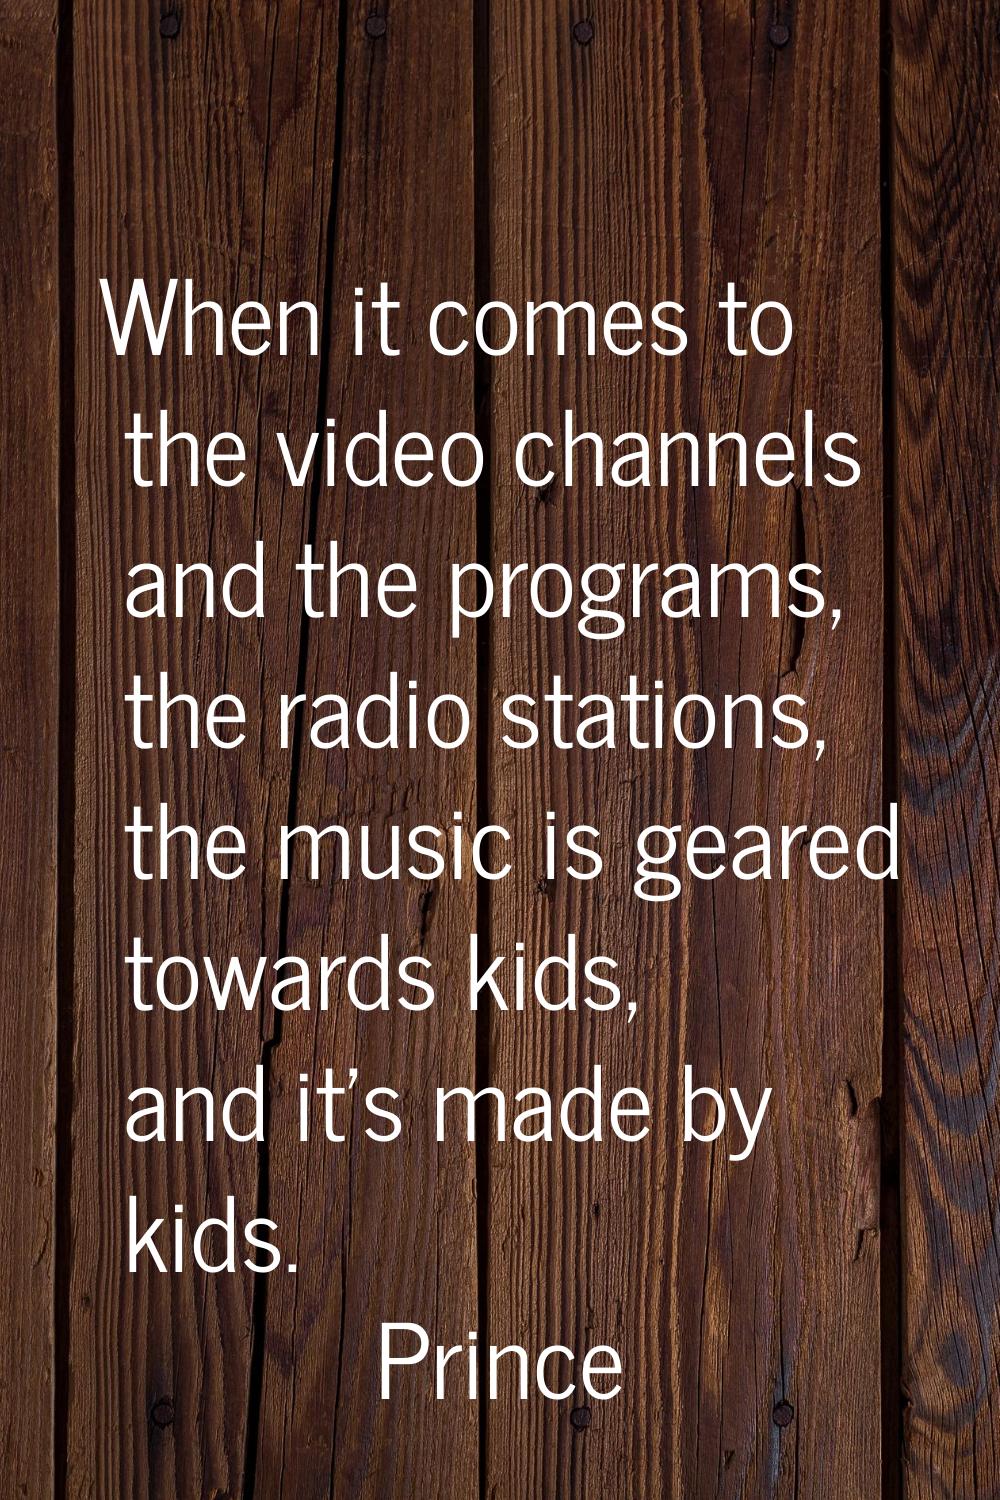 When it comes to the video channels and the programs, the radio stations, the music is geared towar